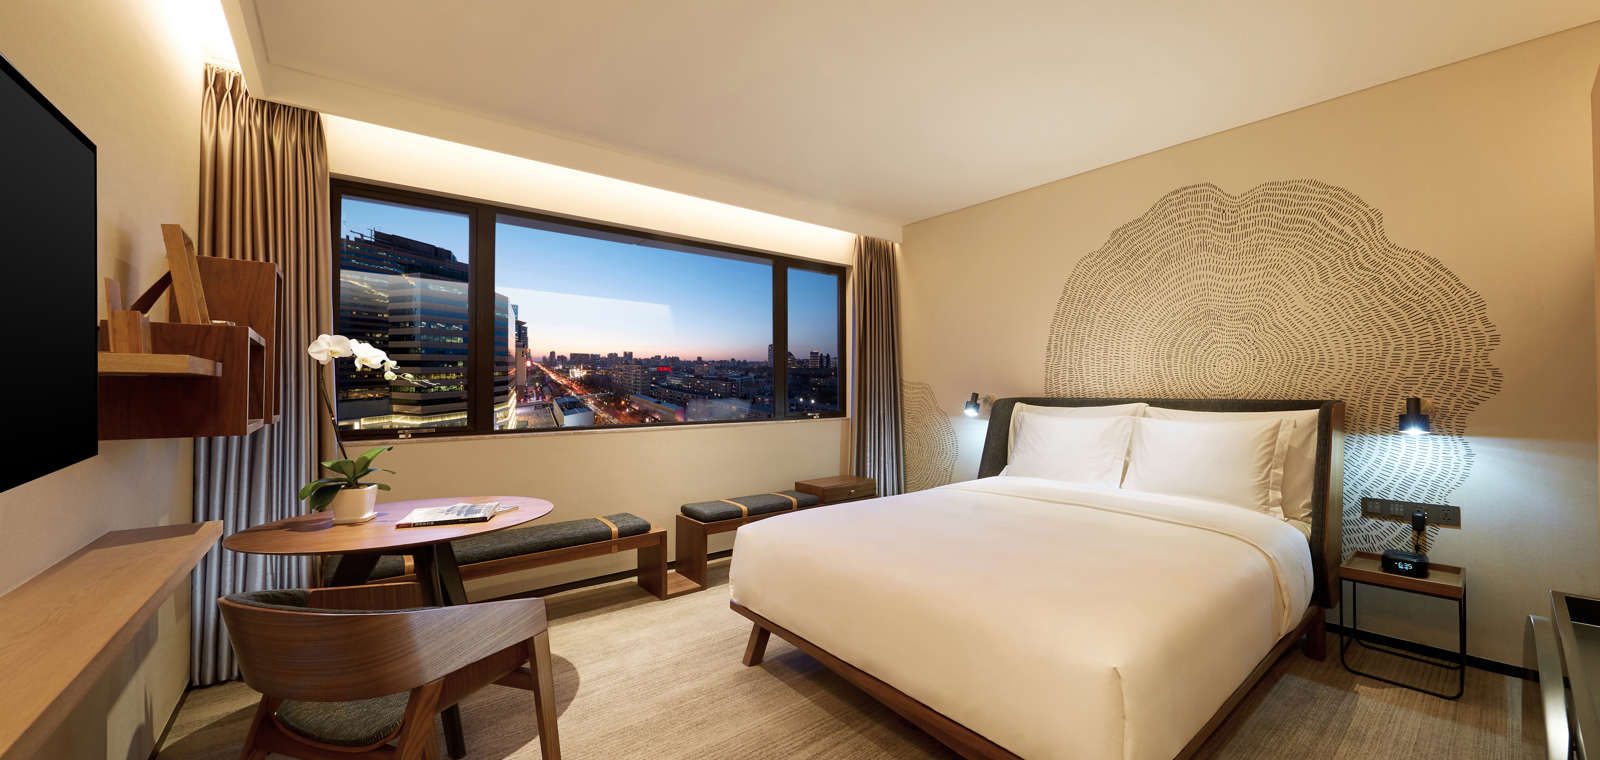 Standard Room with view to Sanlitun nightlife leisure area 